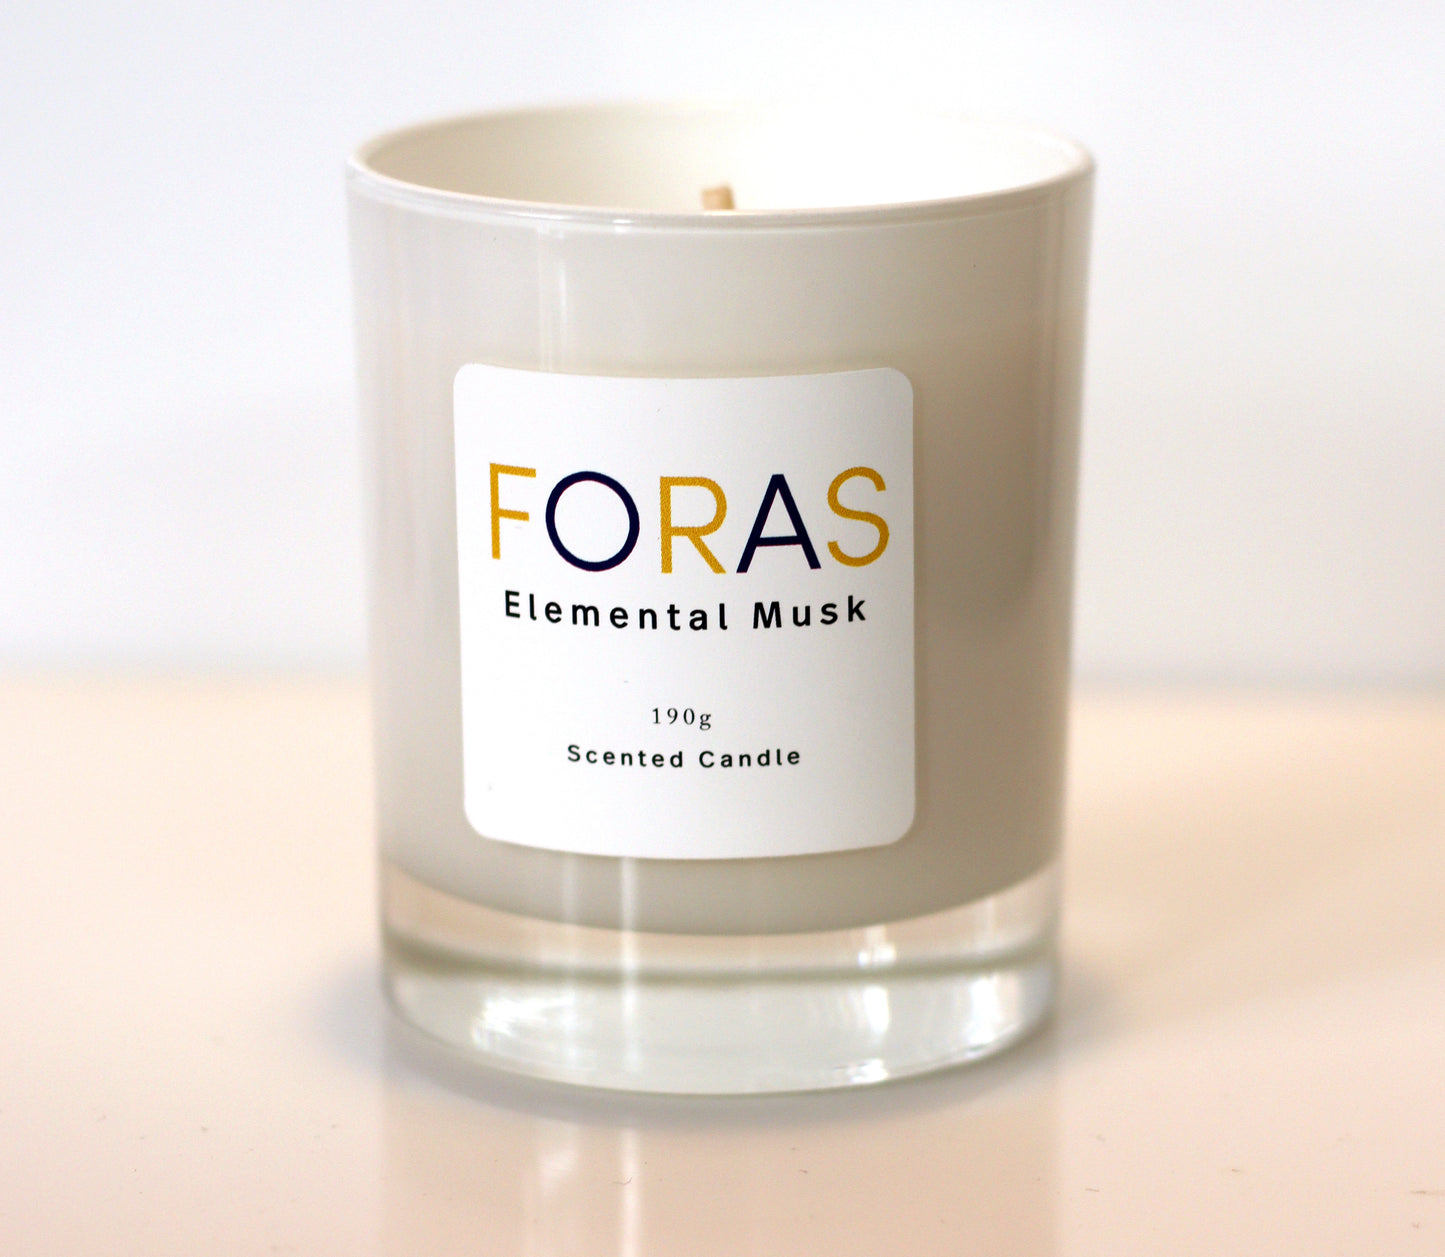 Elemental Musk candle